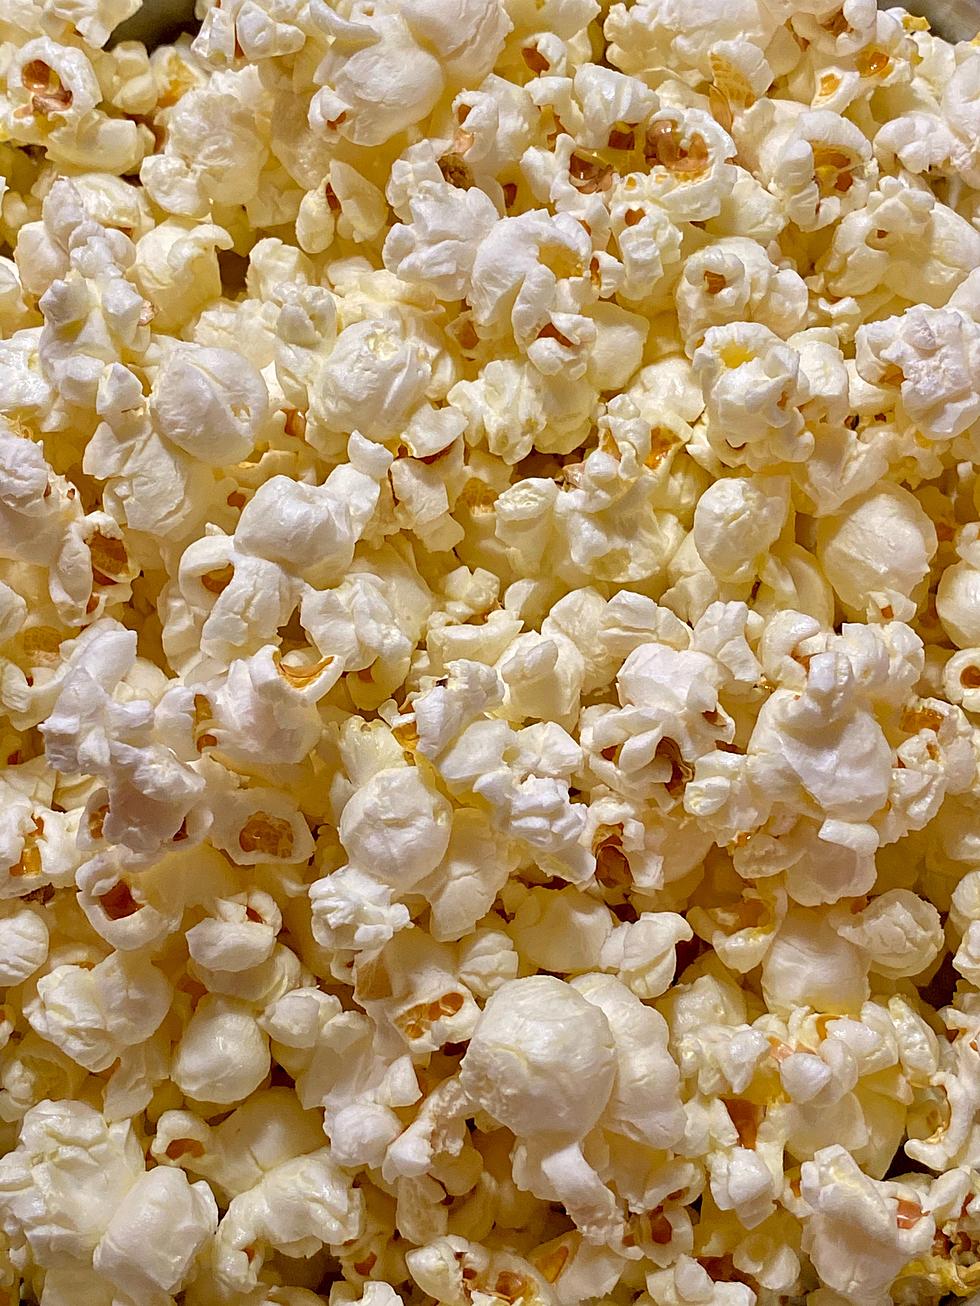 Lubbock, If You Like Popcorn, You’ll Love This New Business Coming Soon